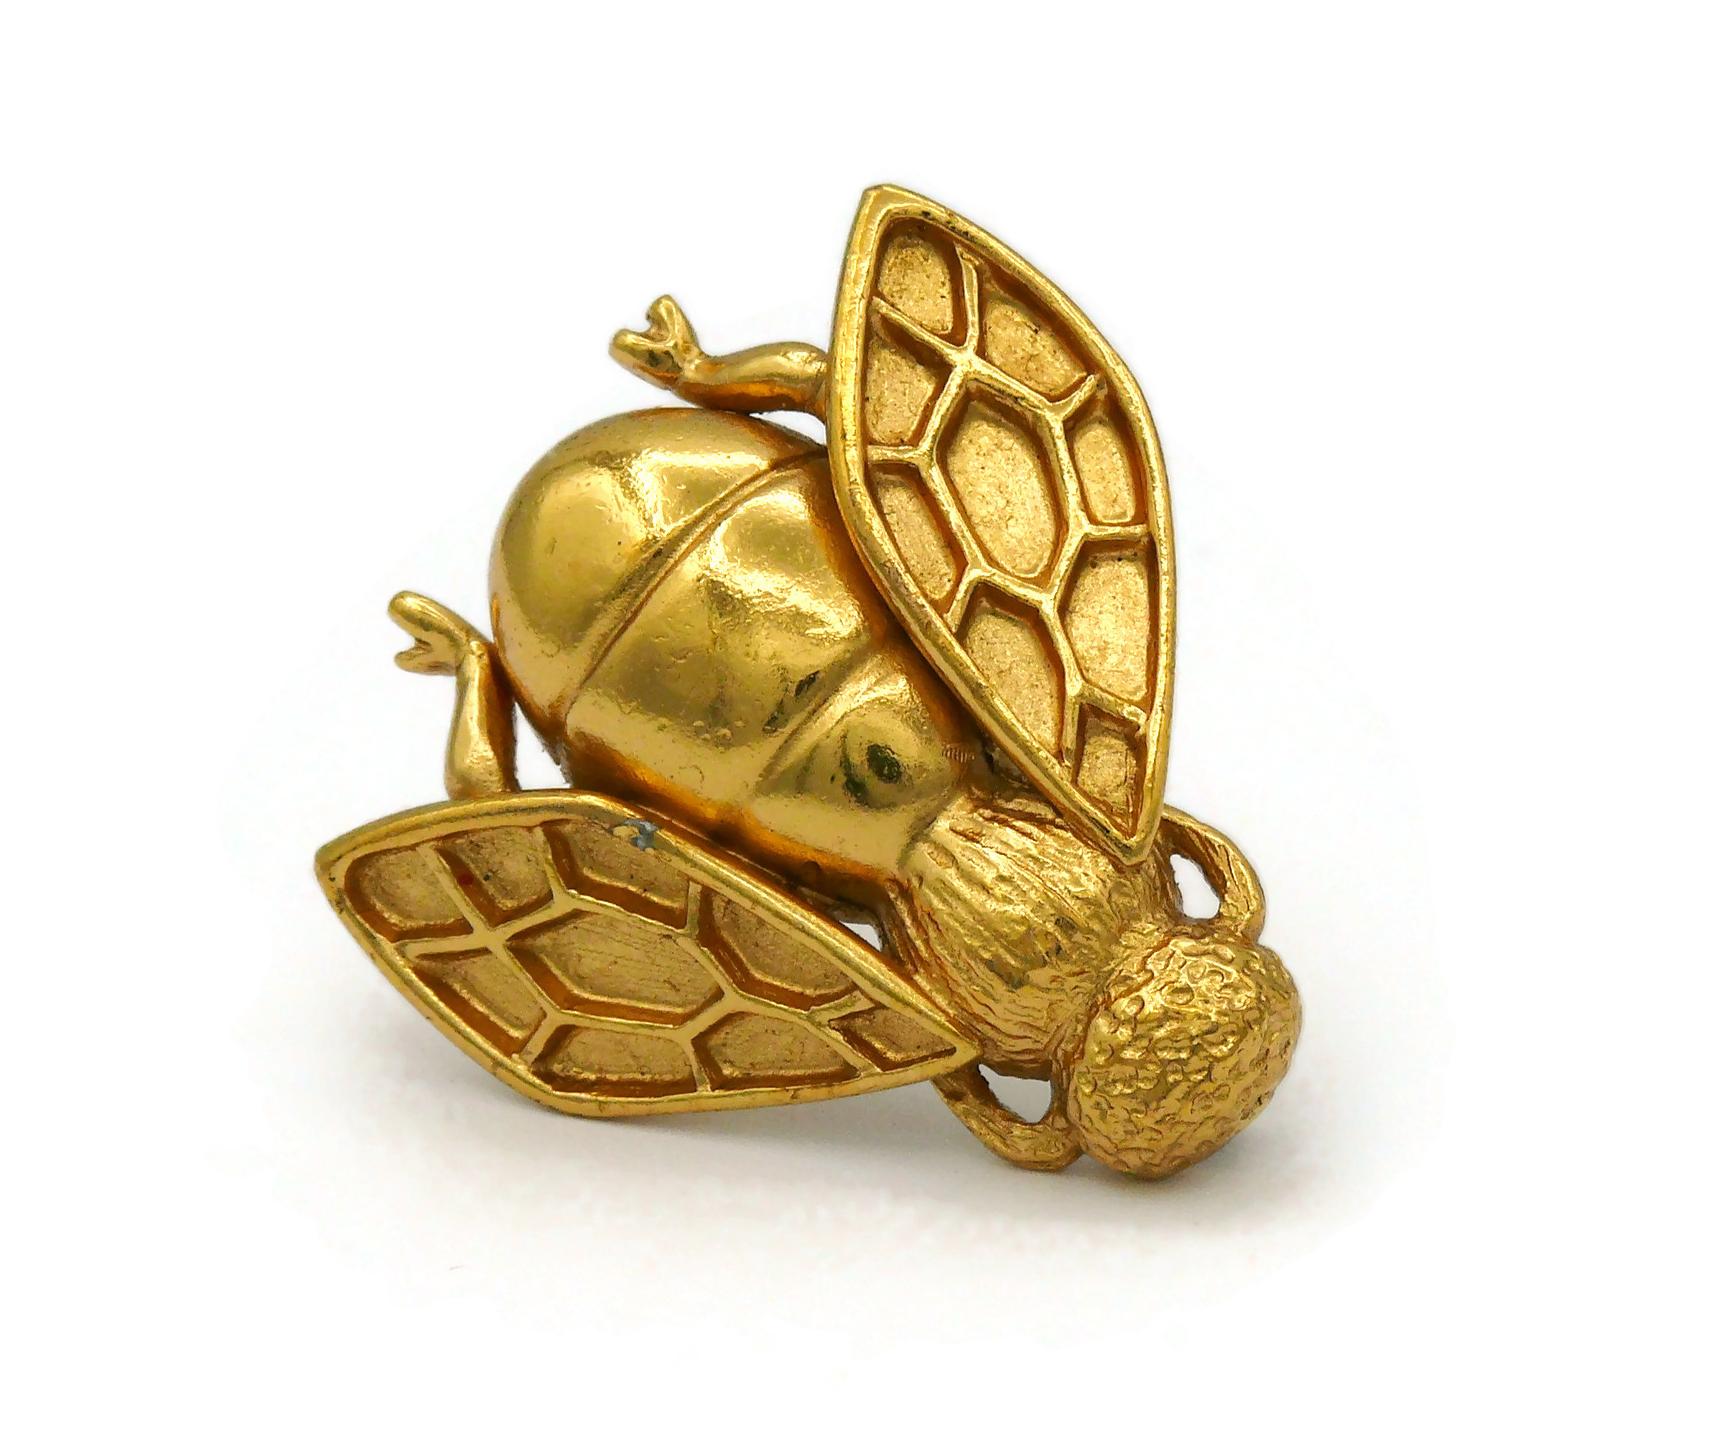 CHRISTIAN DIOR Boutique Vintage Iconic Gold Tone Bee Brooch 1